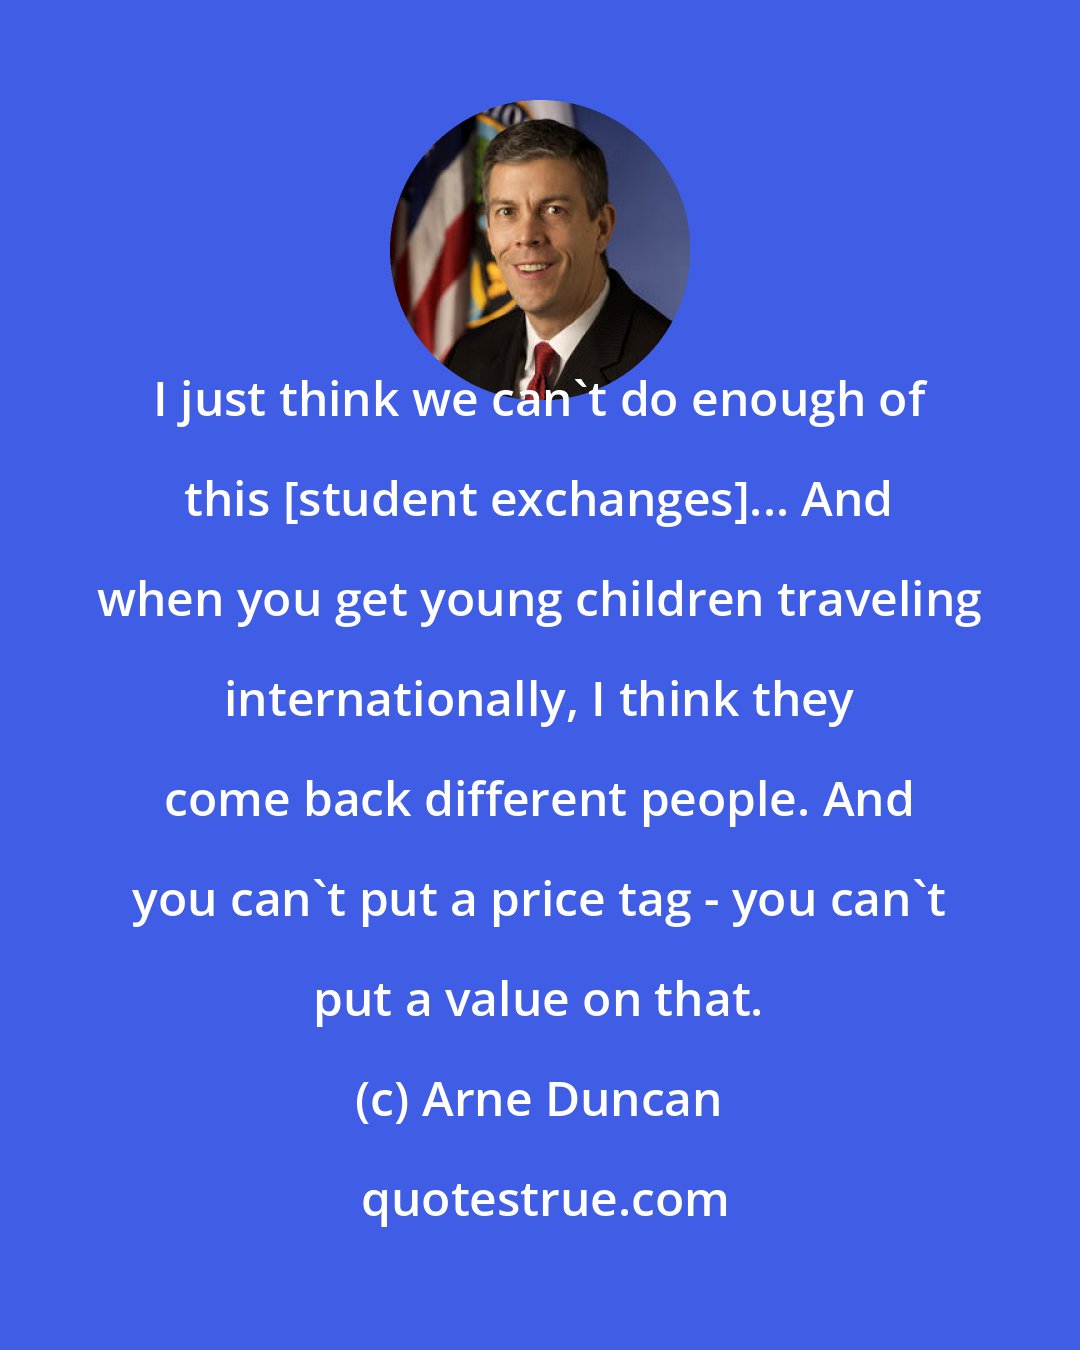 Arne Duncan: I just think we can't do enough of this [student exchanges]... And when you get young children traveling internationally, I think they come back different people. And you can't put a price tag - you can't put a value on that.